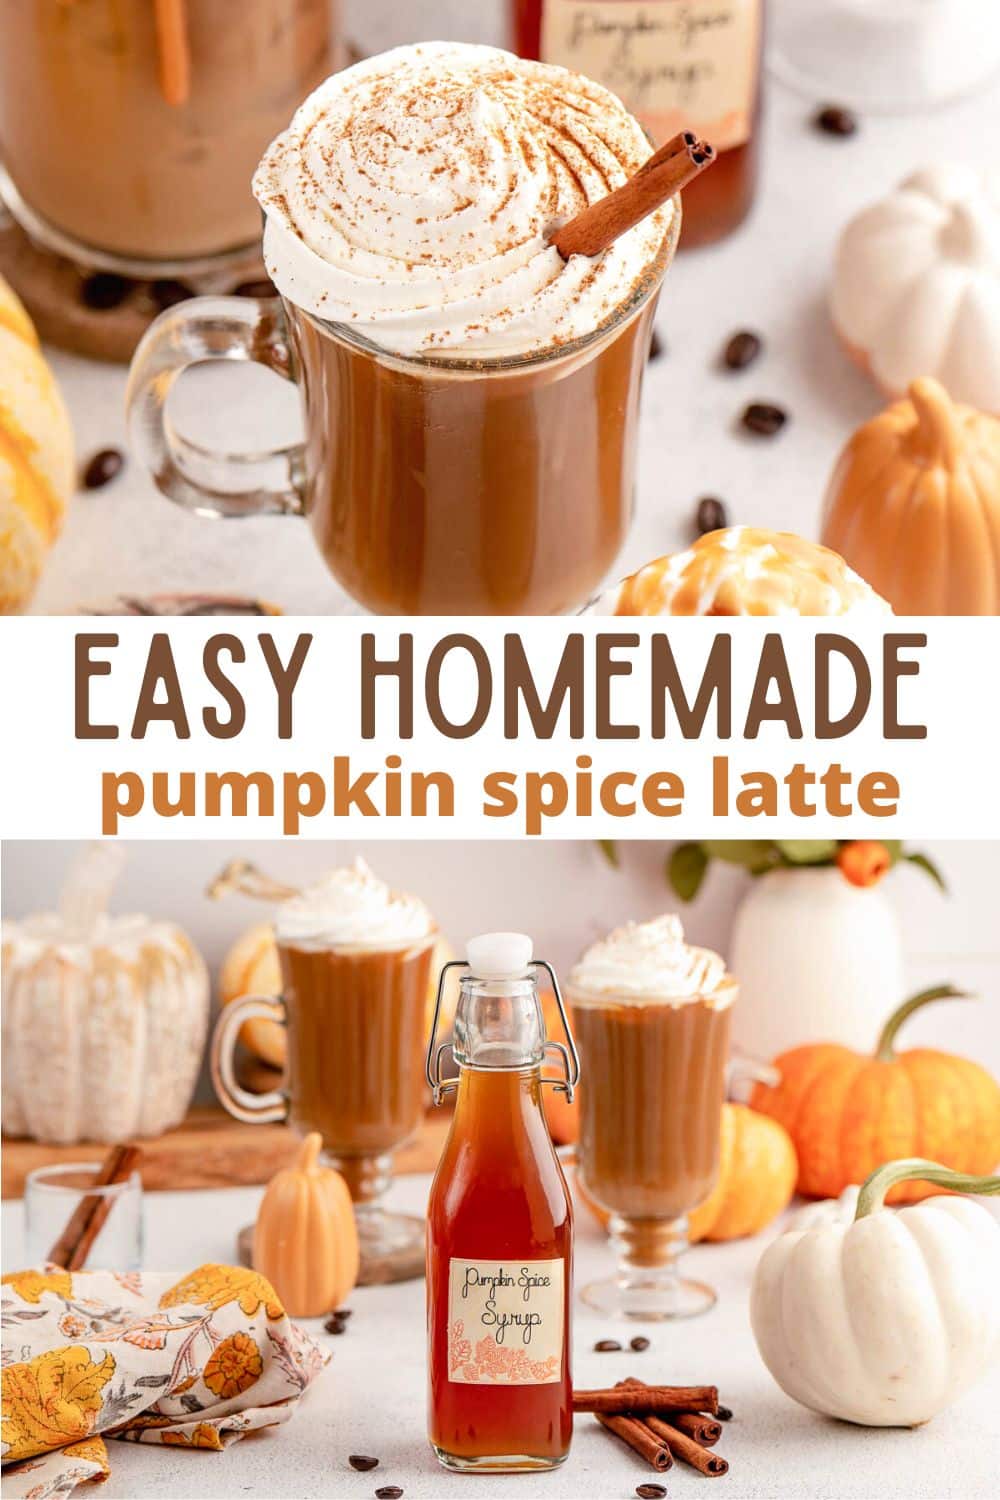 Savor fall with our pumpkin spice latte recipe—robust coffee, warm milk, and a delicious homemade pumpkin syrup create a perfect balance of your very own autumn bliss in every sip. Whip up a homemade PSL copycat recipe within minutes!